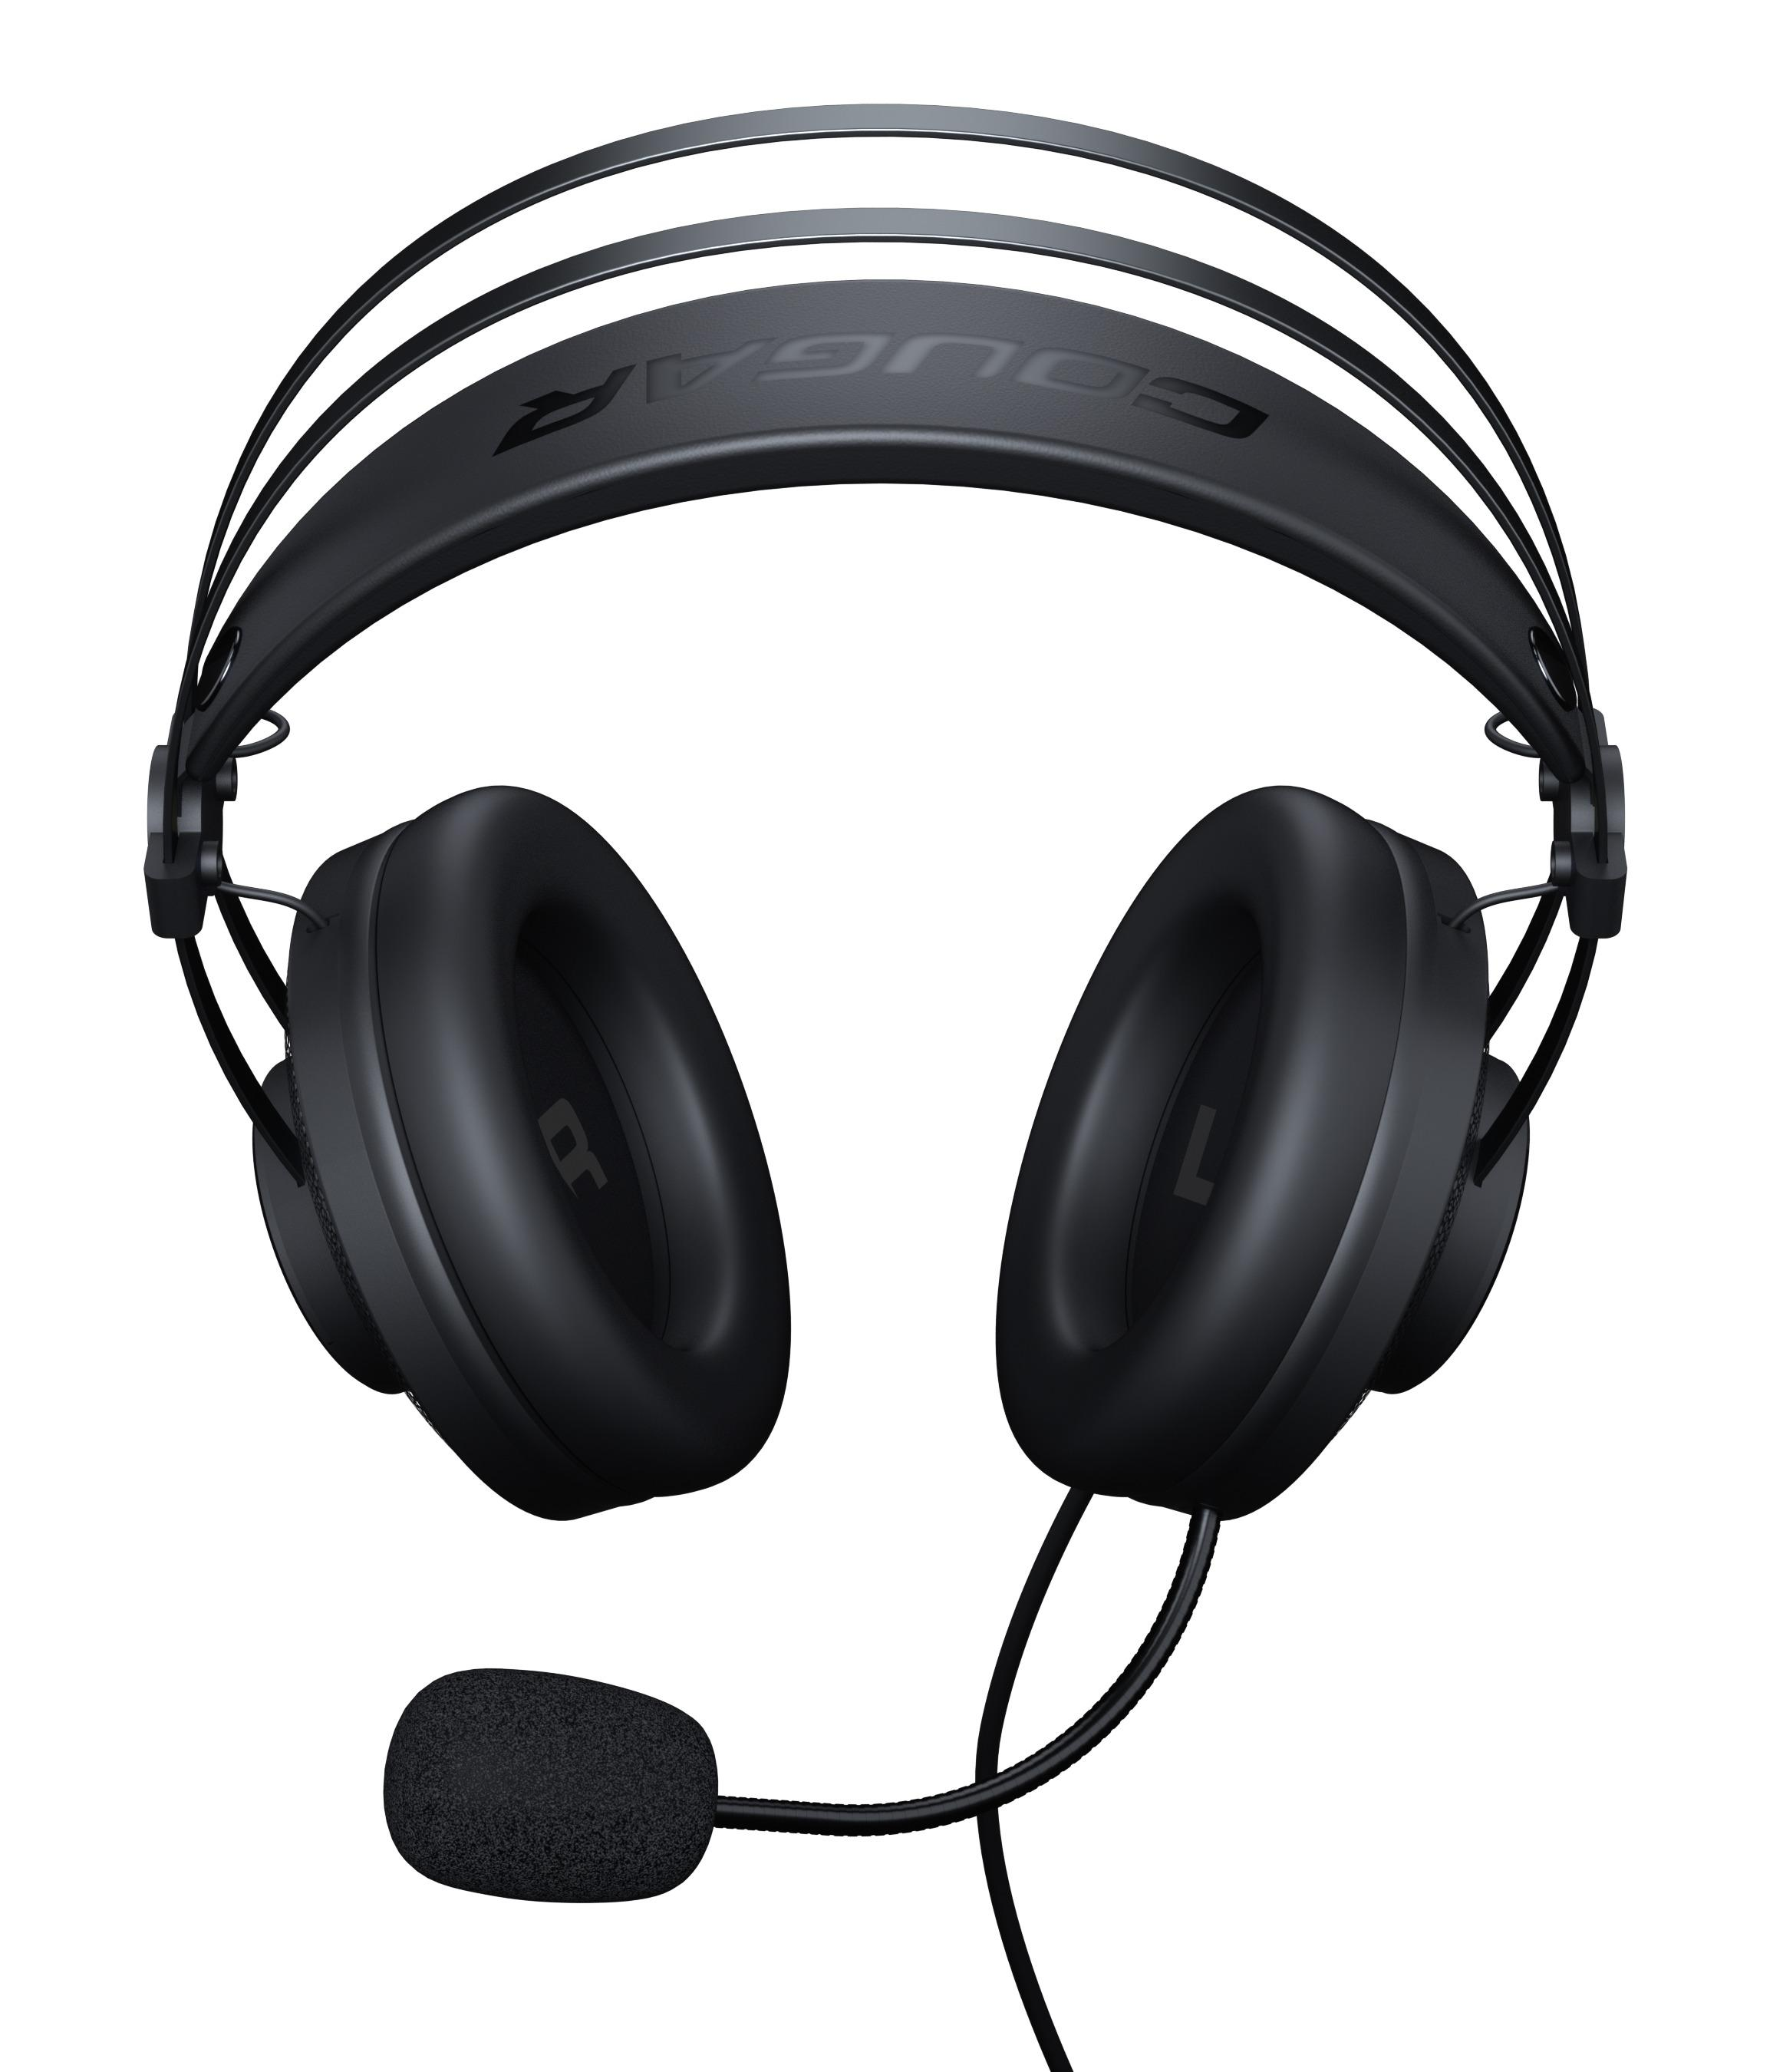 COUGAR Immersa Essential, Over-ear Headset Schwarz Gaming